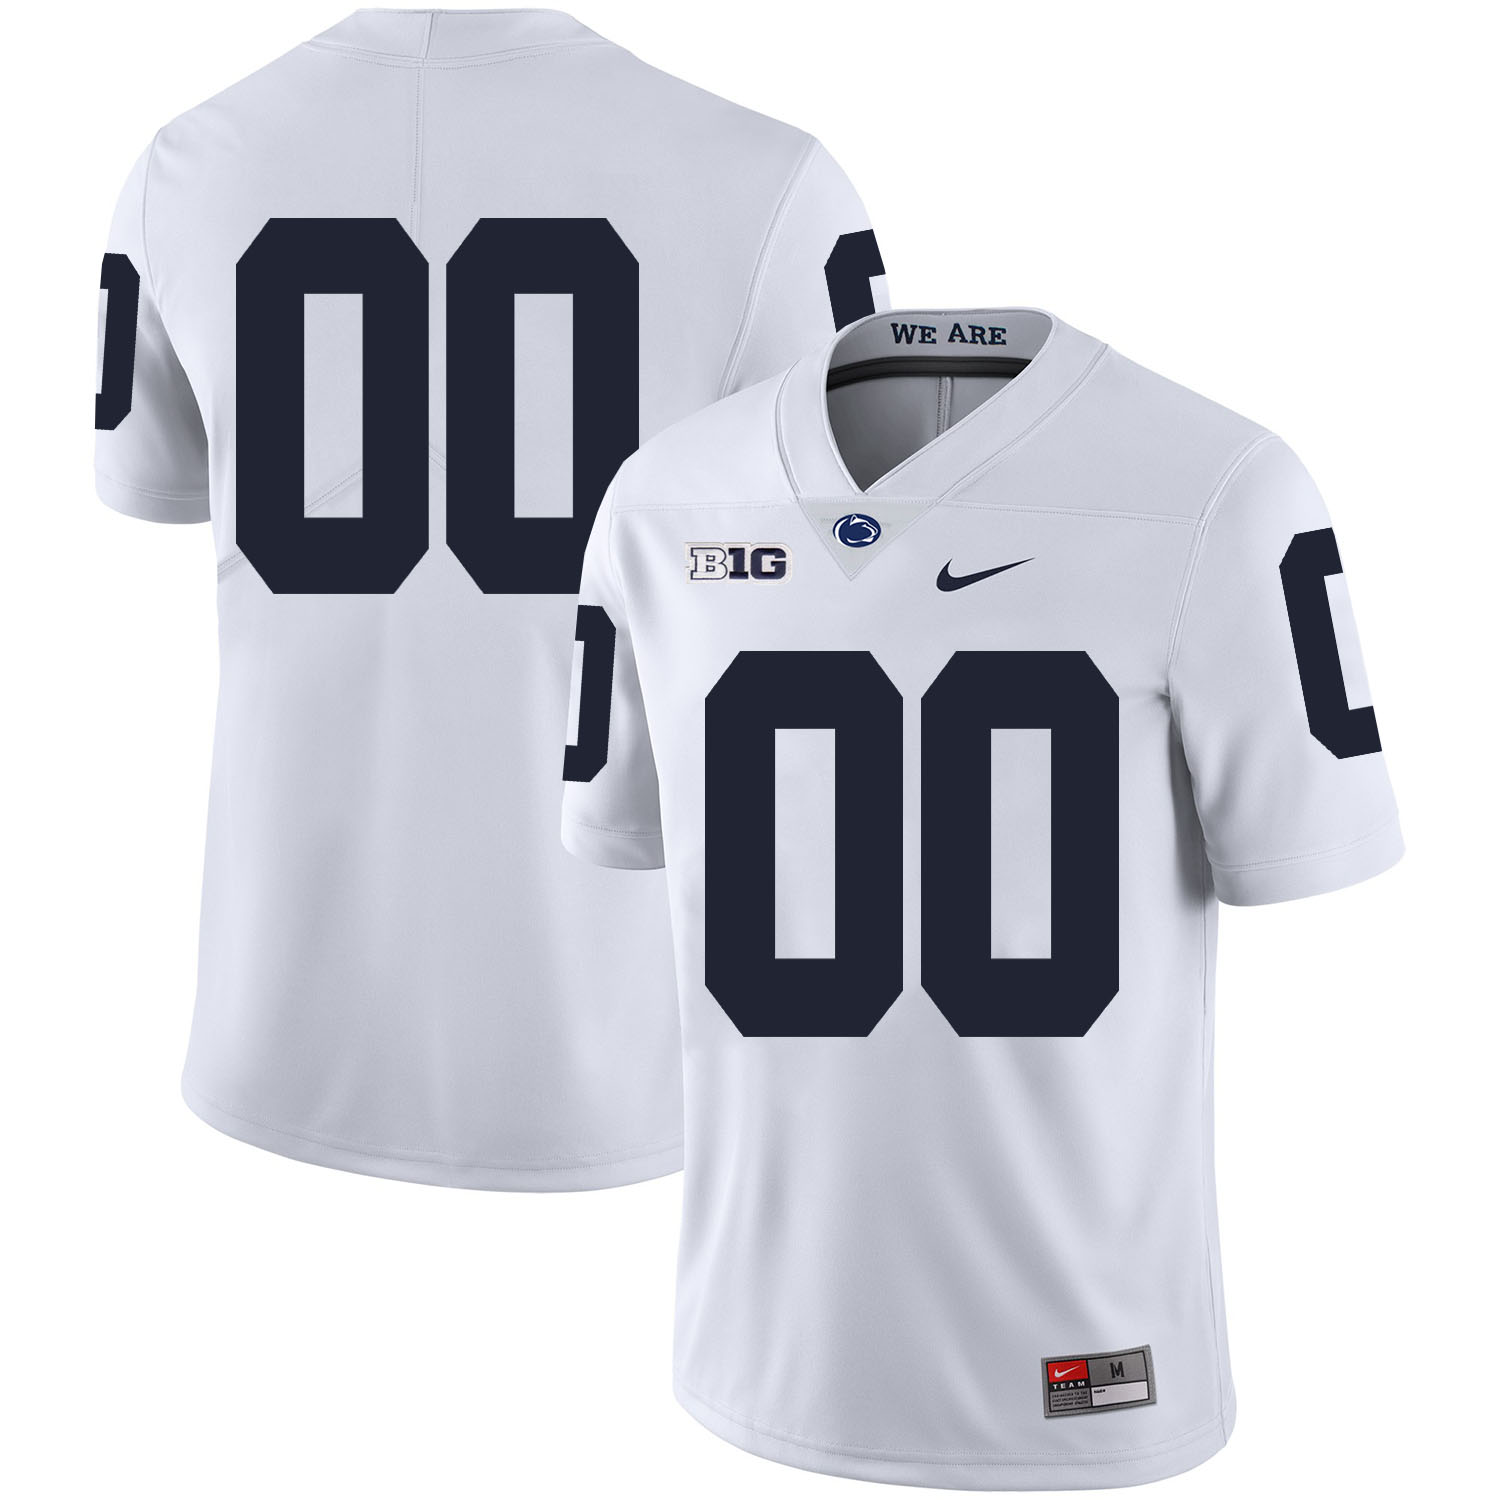 Penn State Nittany Lions White Men's Customized Nike College Football Jersey